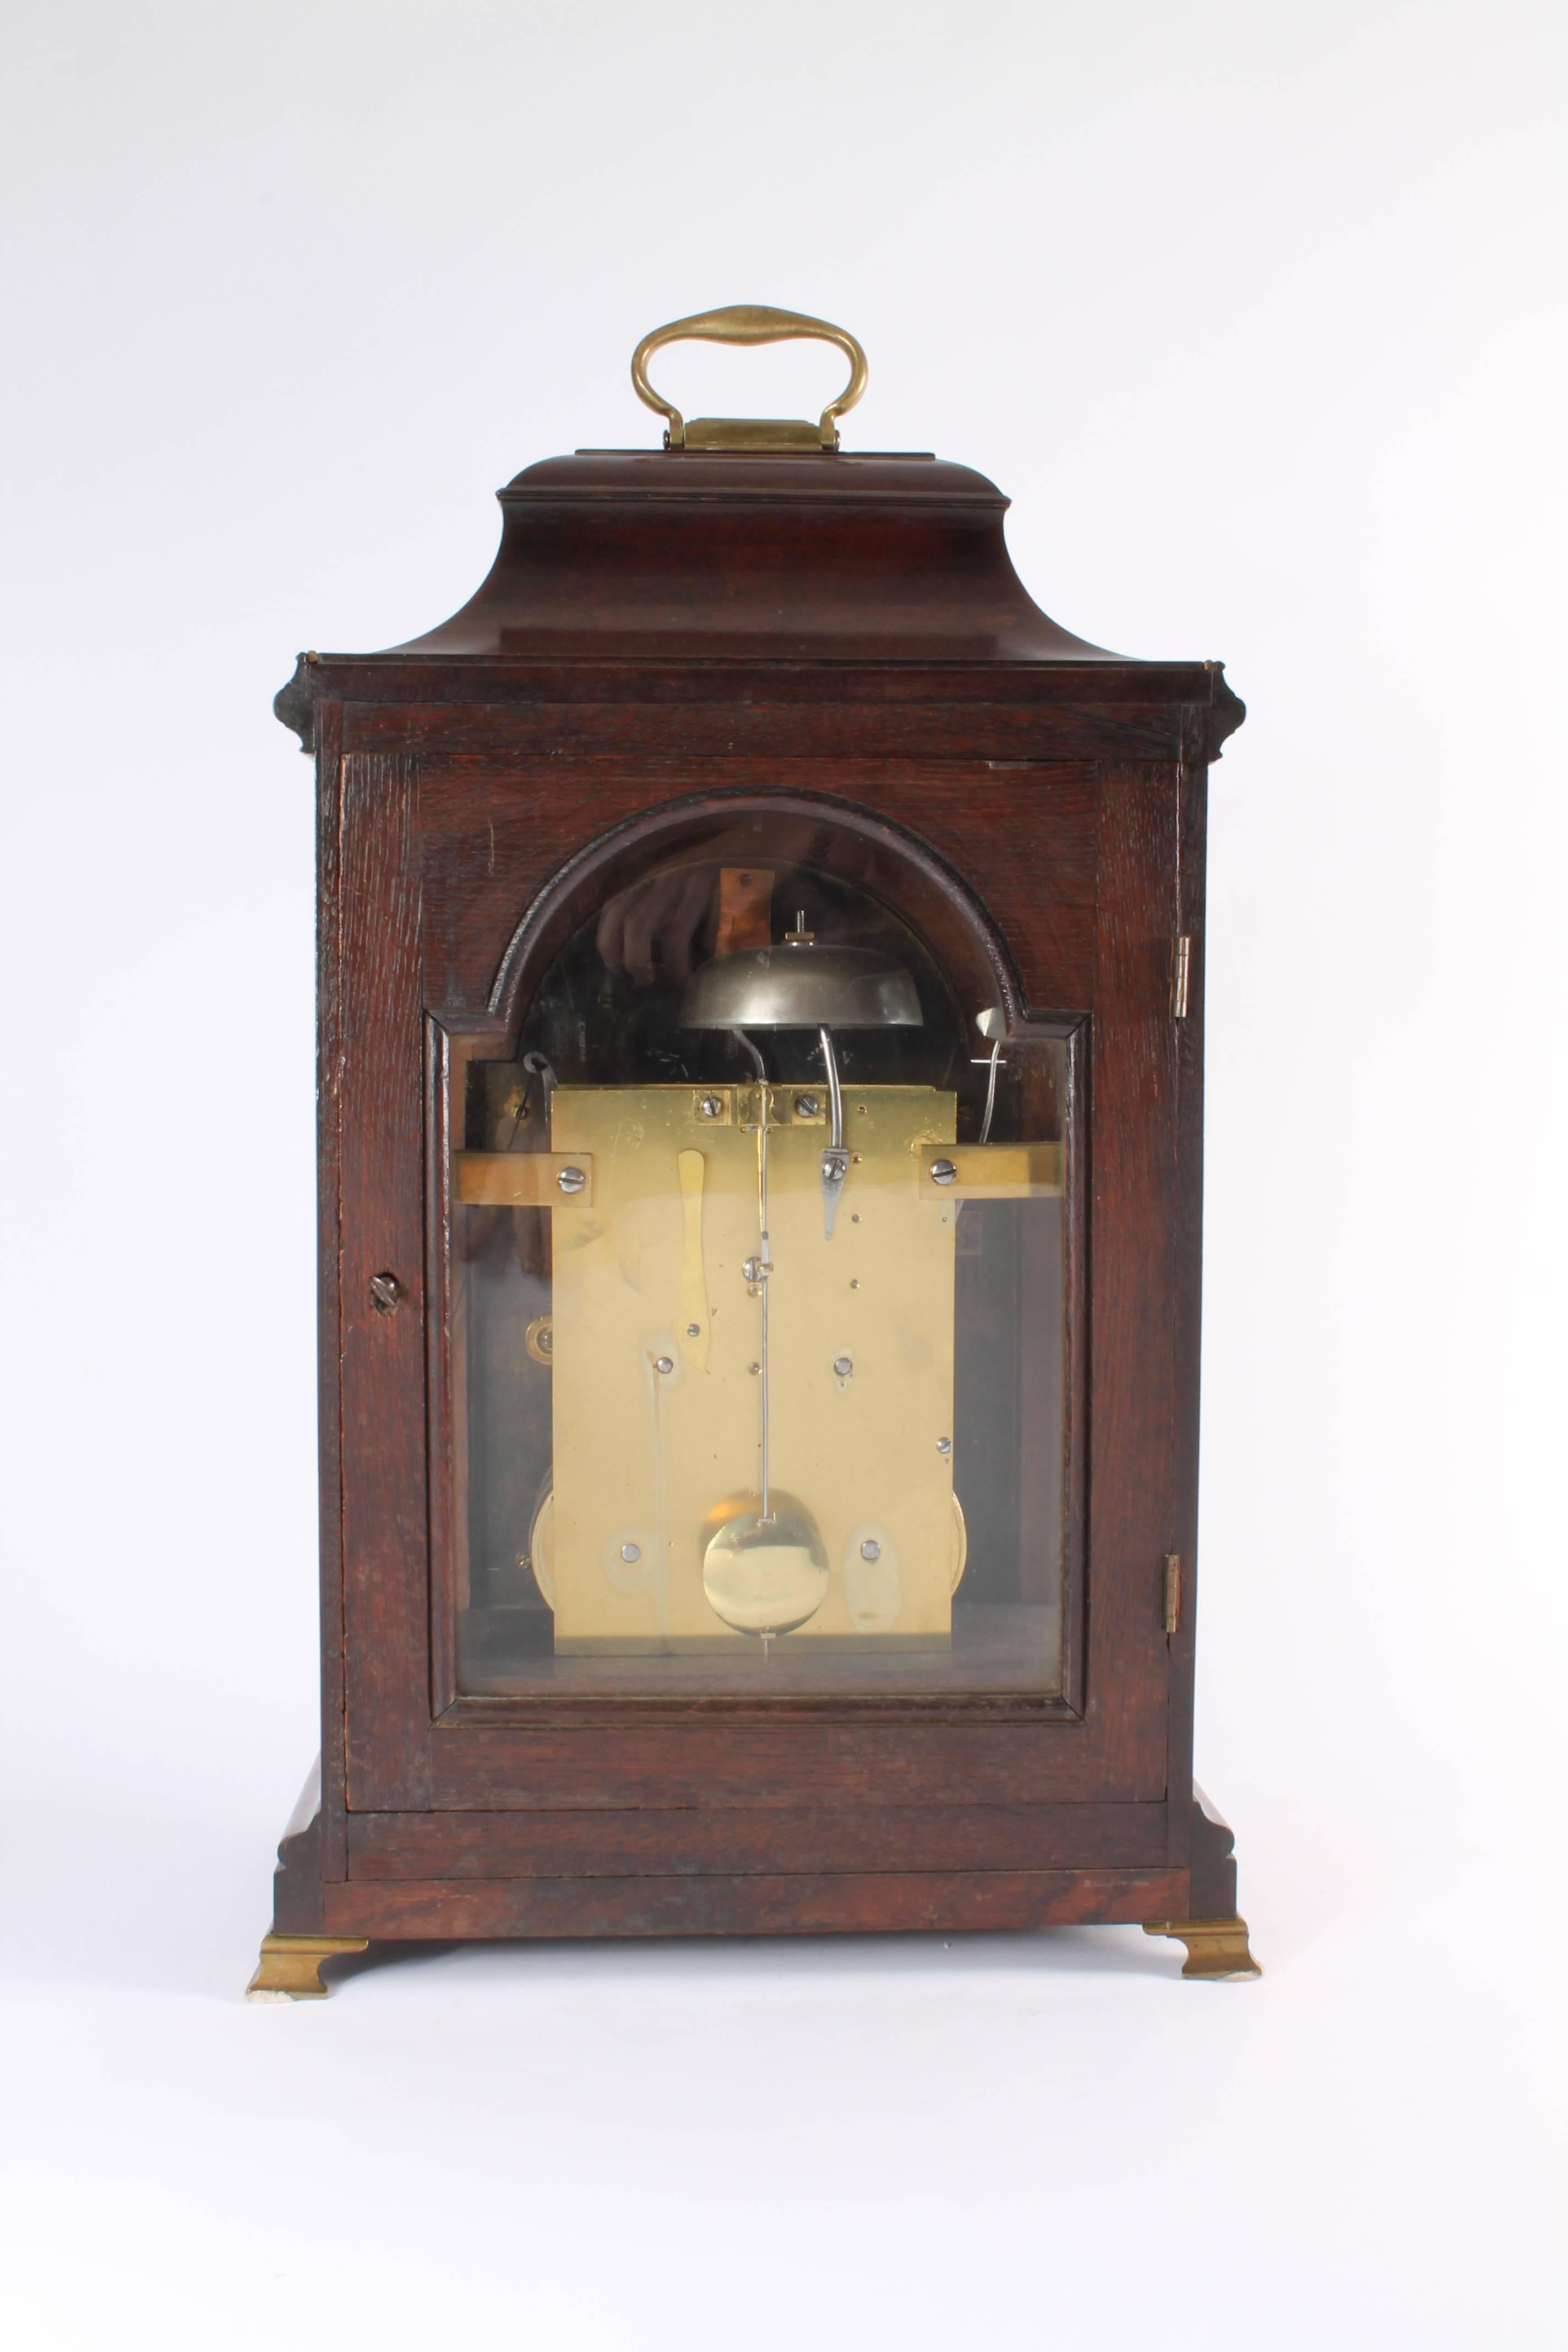 Rare German Mahogany Table Clock by Peter Behrens Schleswig, circa 1770 For Sale 1